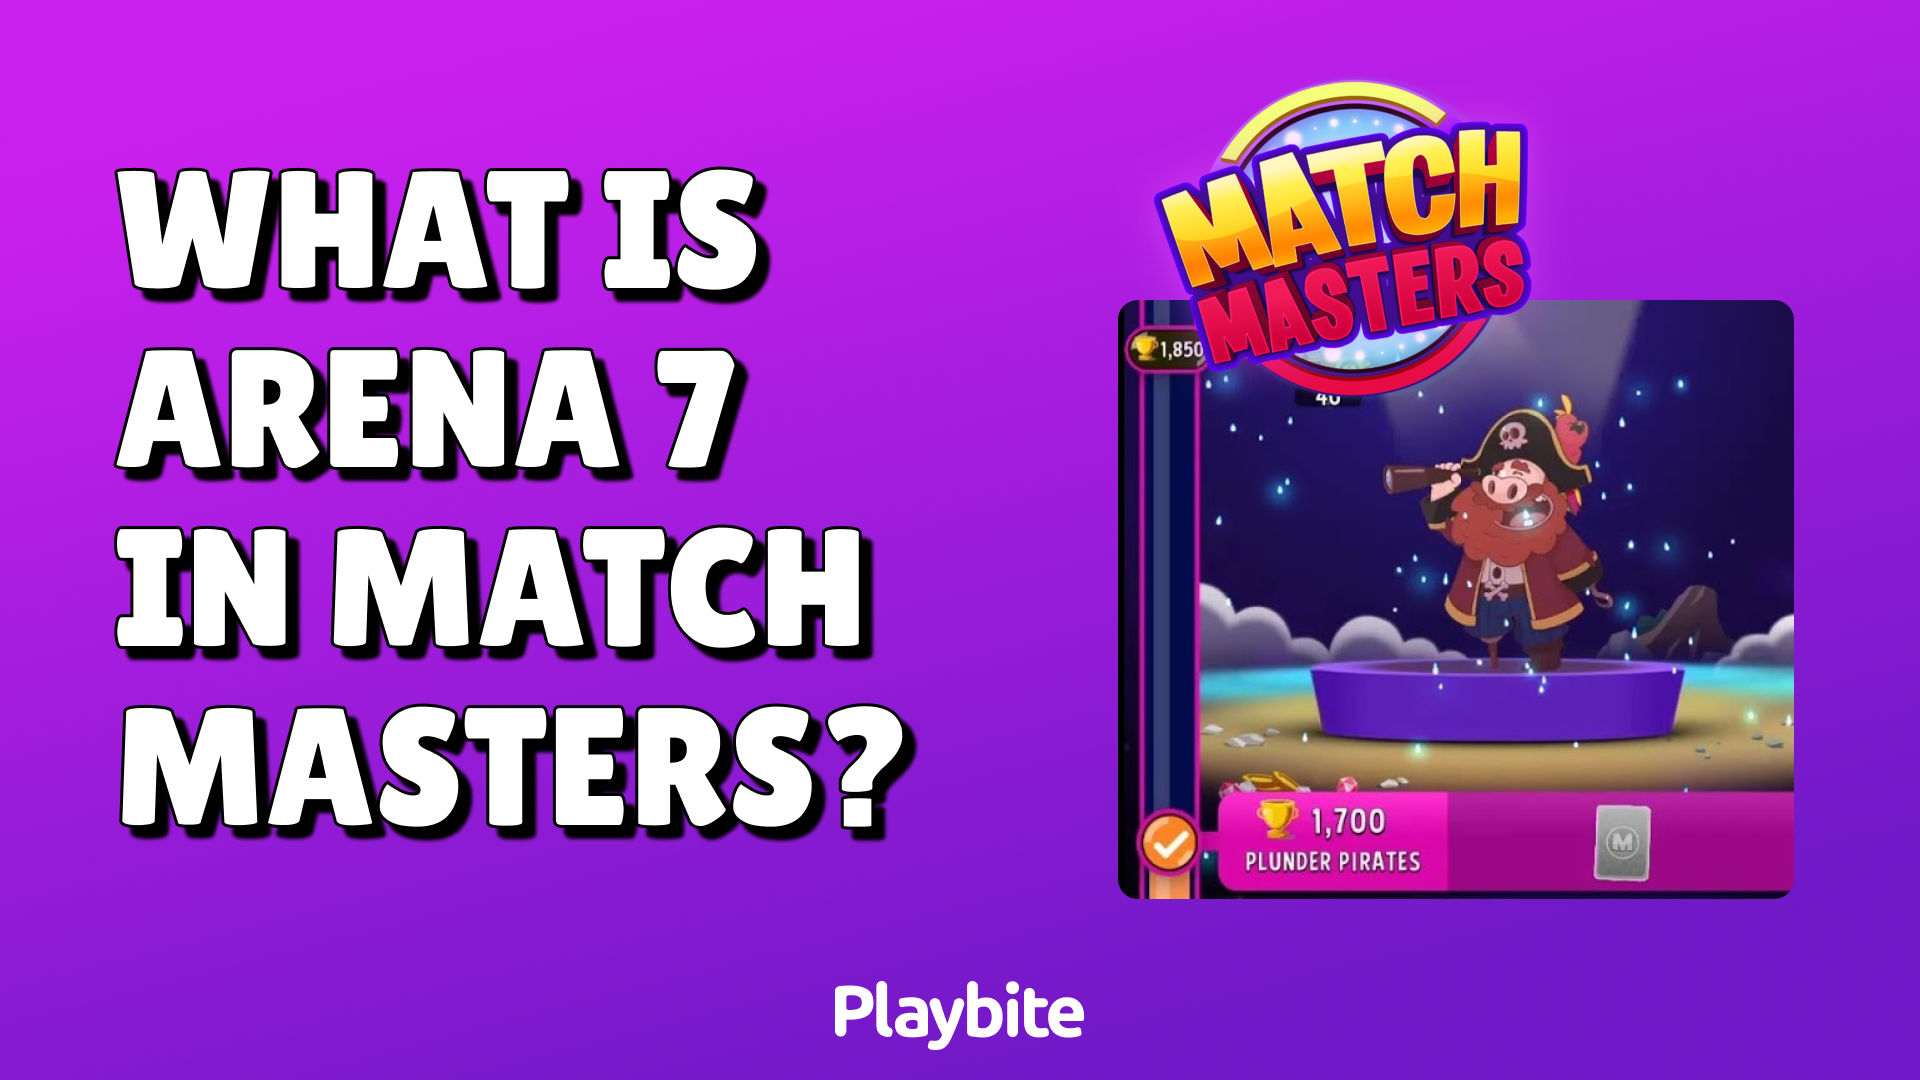 What Is Arena 7 In Match Masters?